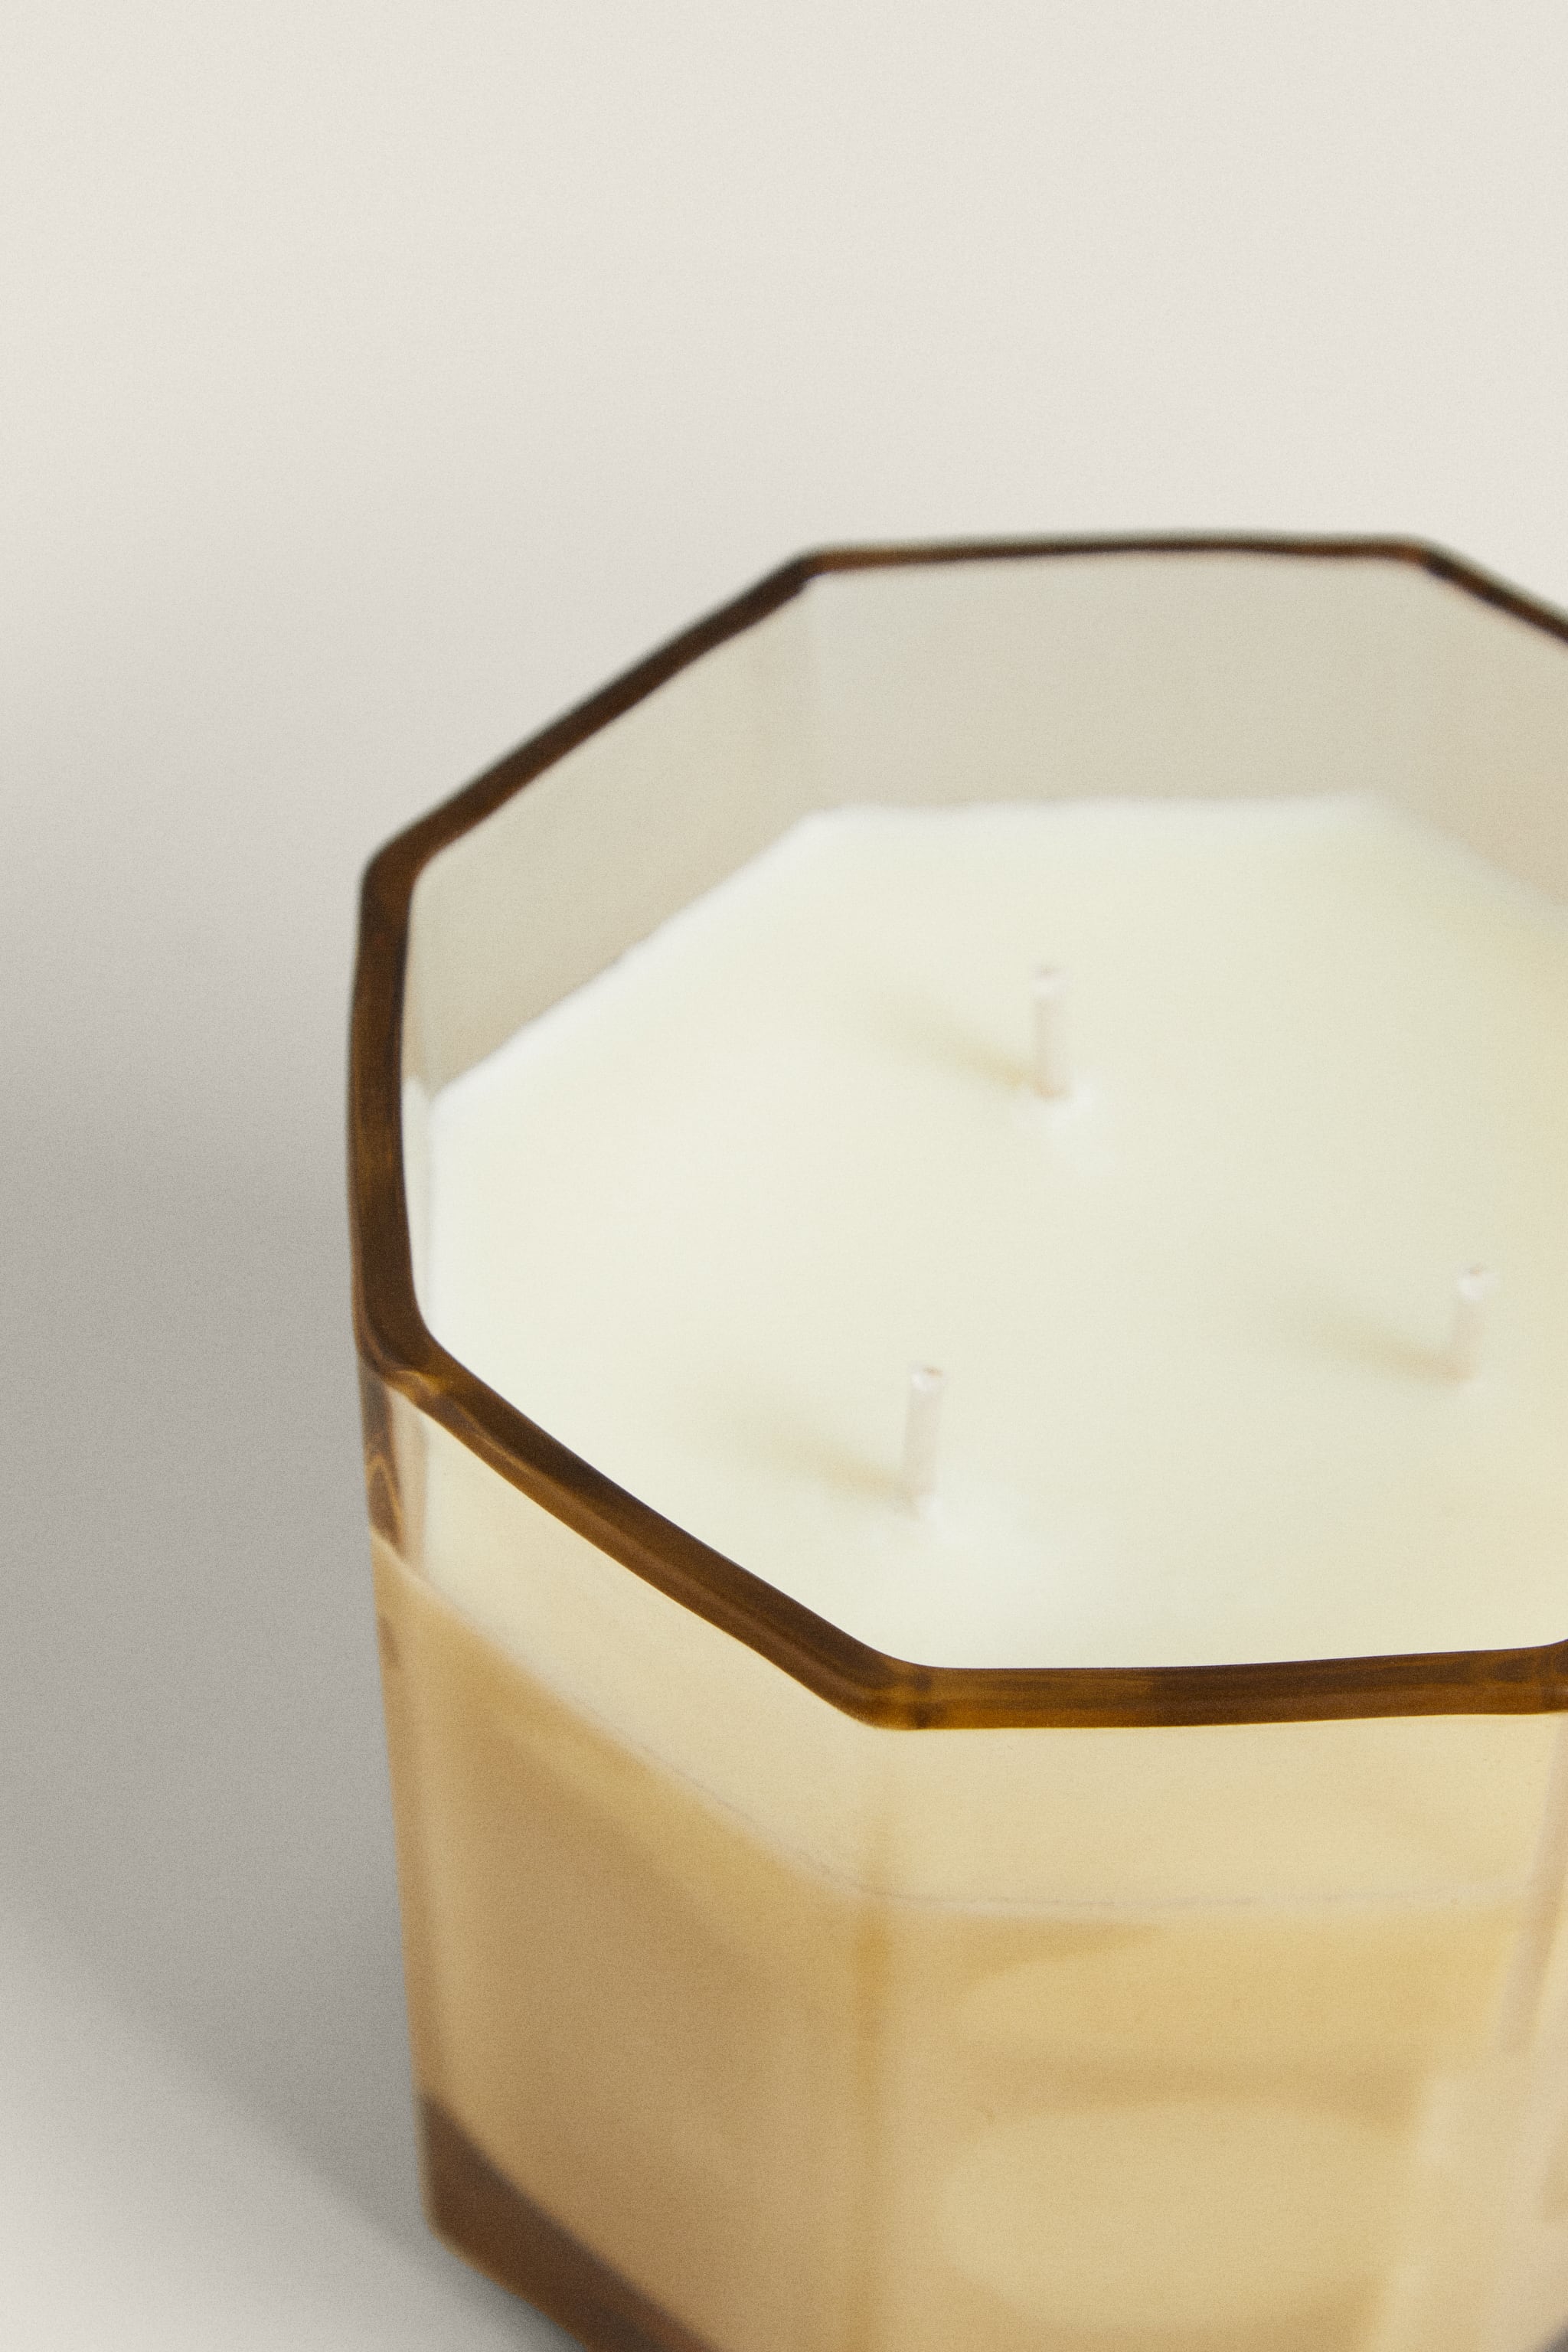 G) MIMOSA SUBLIME SCENTED CANDLE